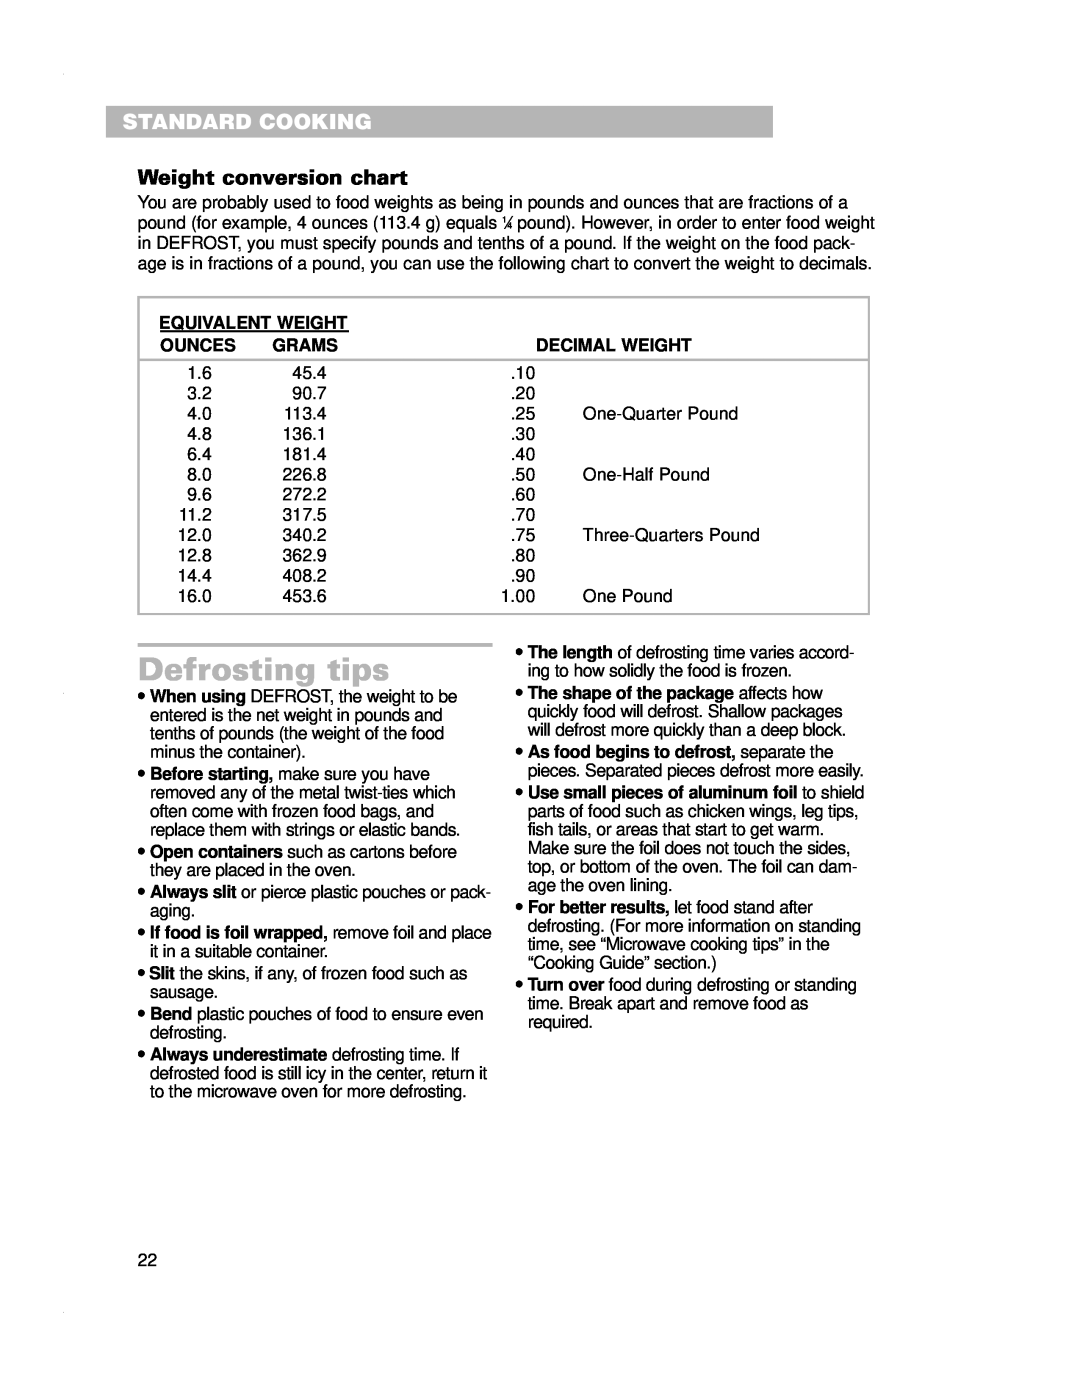 Crosley CMT135SG installation instructions Defrosting tips, Standard Cooking, Weight conversion chart 